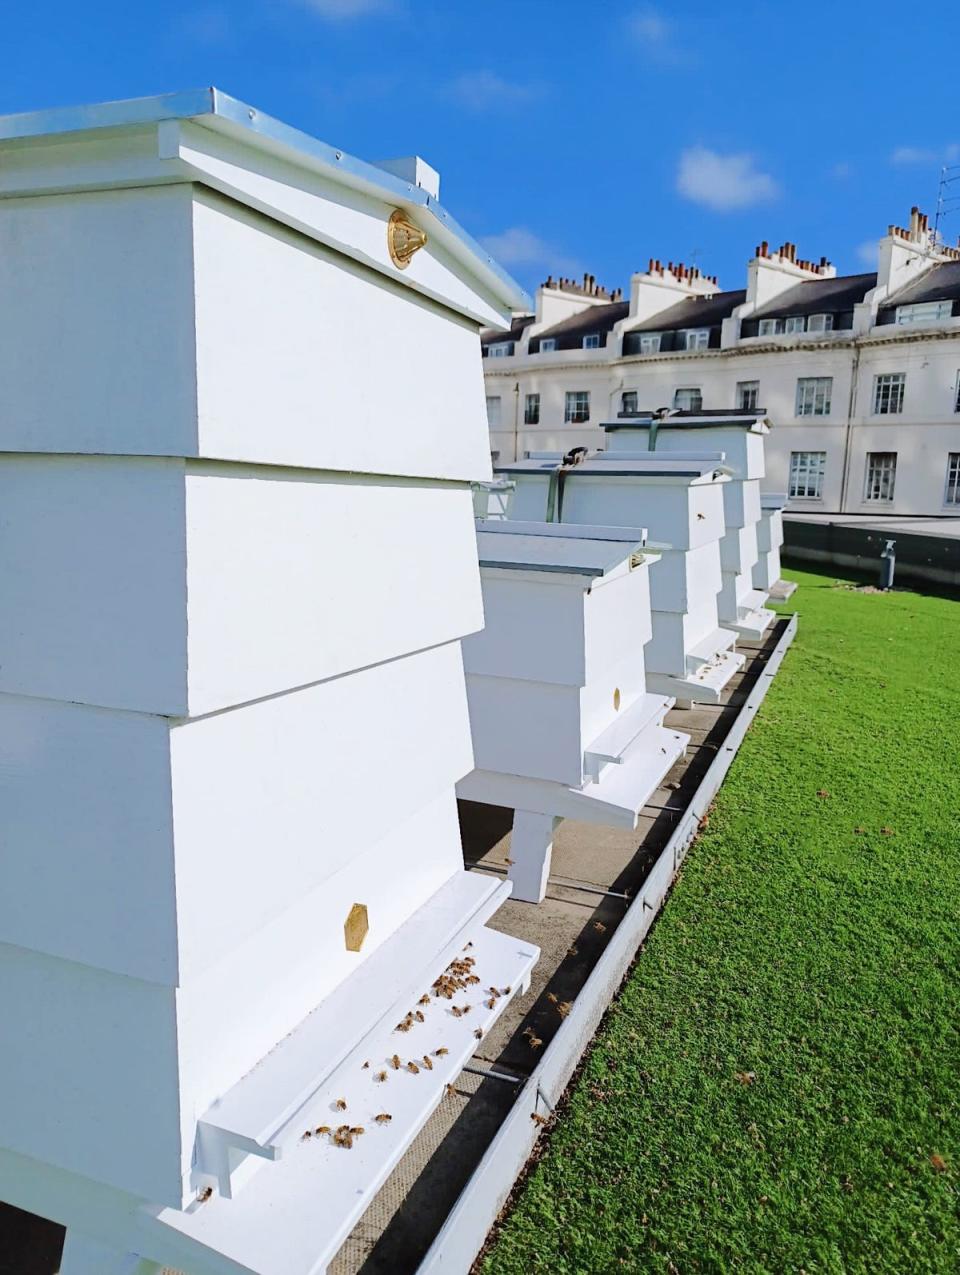 Hive mind: The beehives on the roof (Royal Lancaster London)